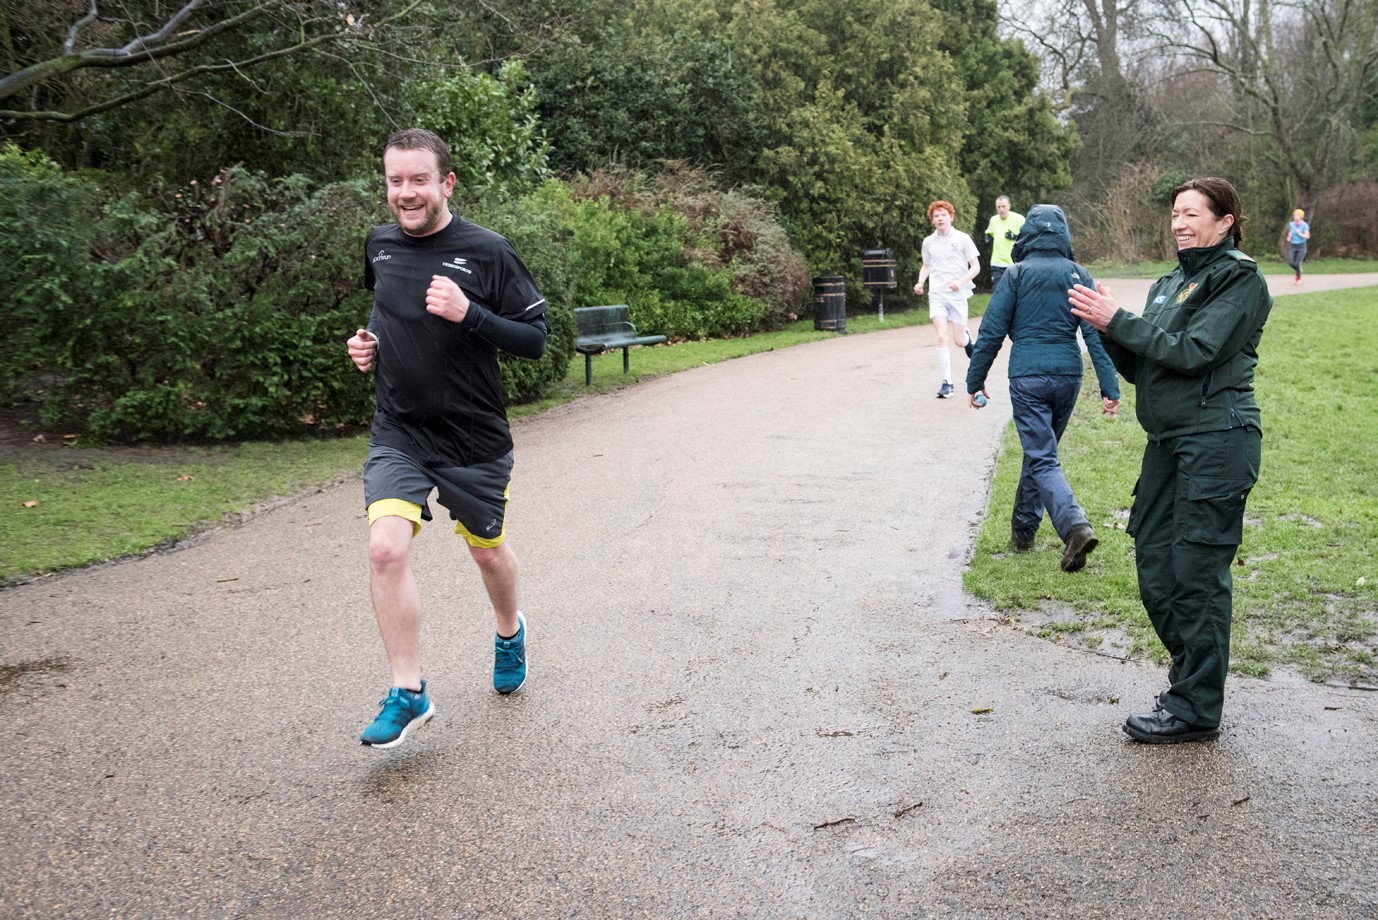 January joggers to benefit from life-saving equipment in parks - London ...